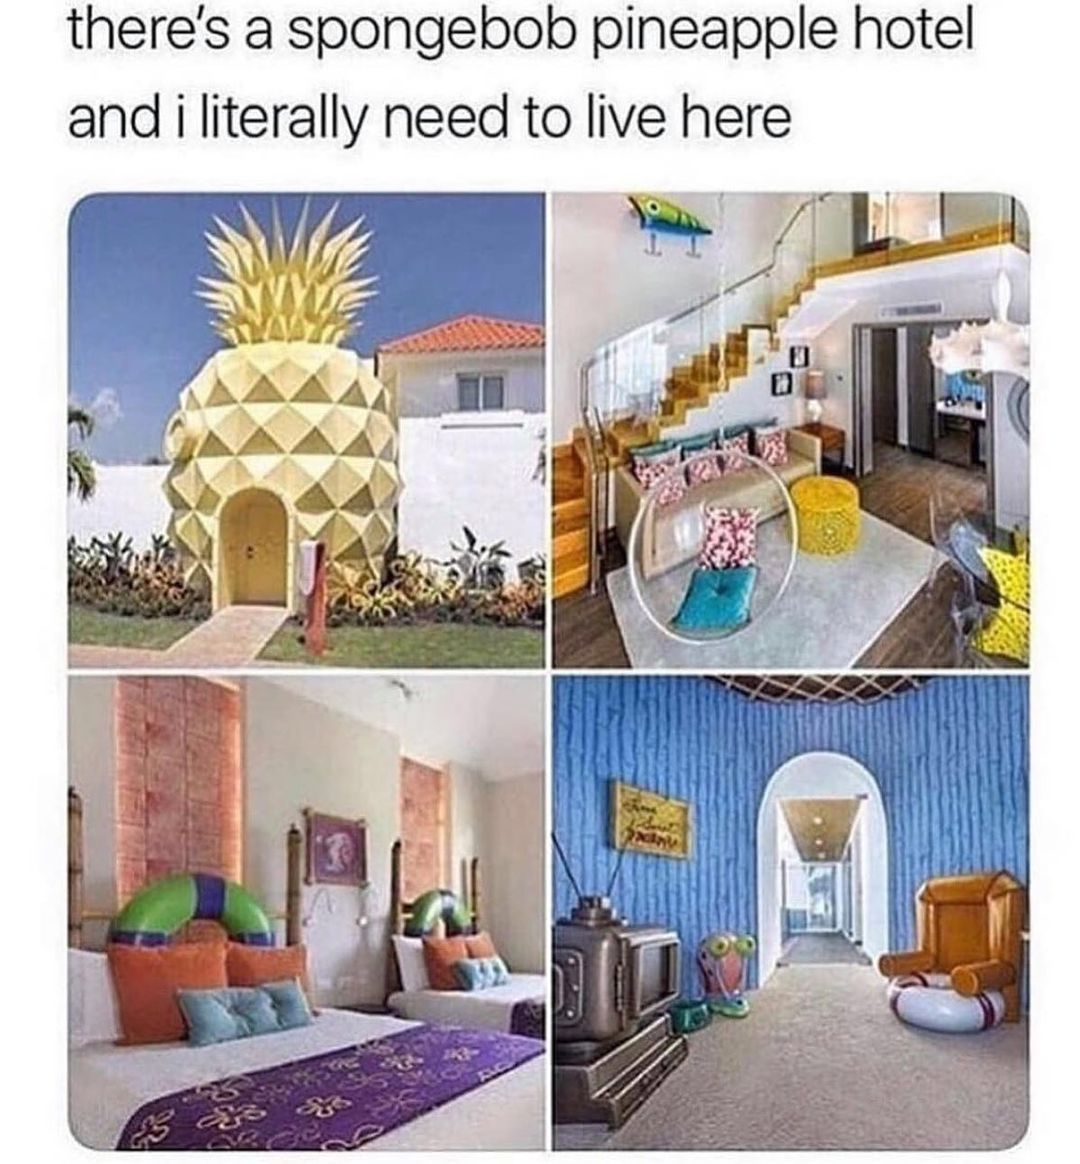 There's a spongebob pineapple hotel and I literally need to live here.